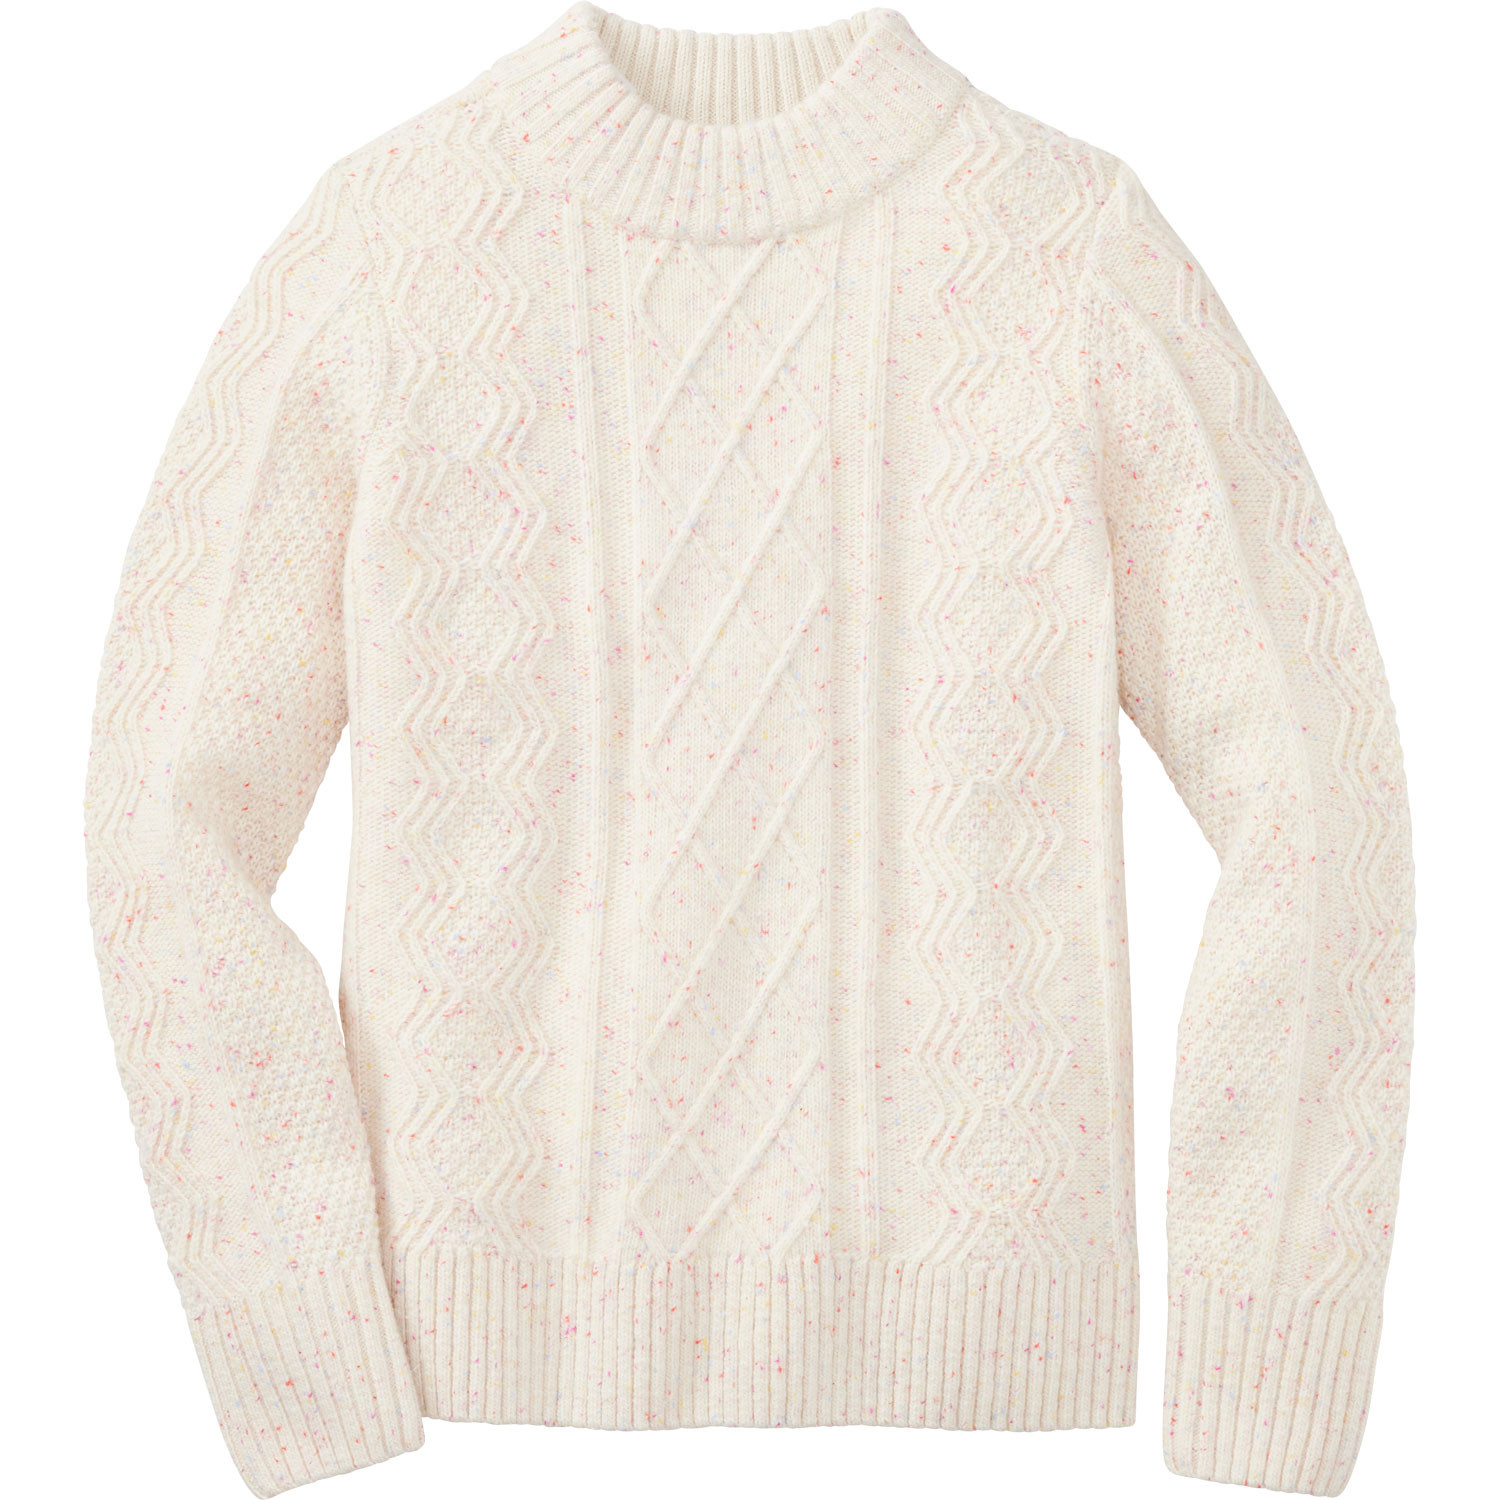 Women's Woolpaca Cable Sweater | Duluth Trading Company